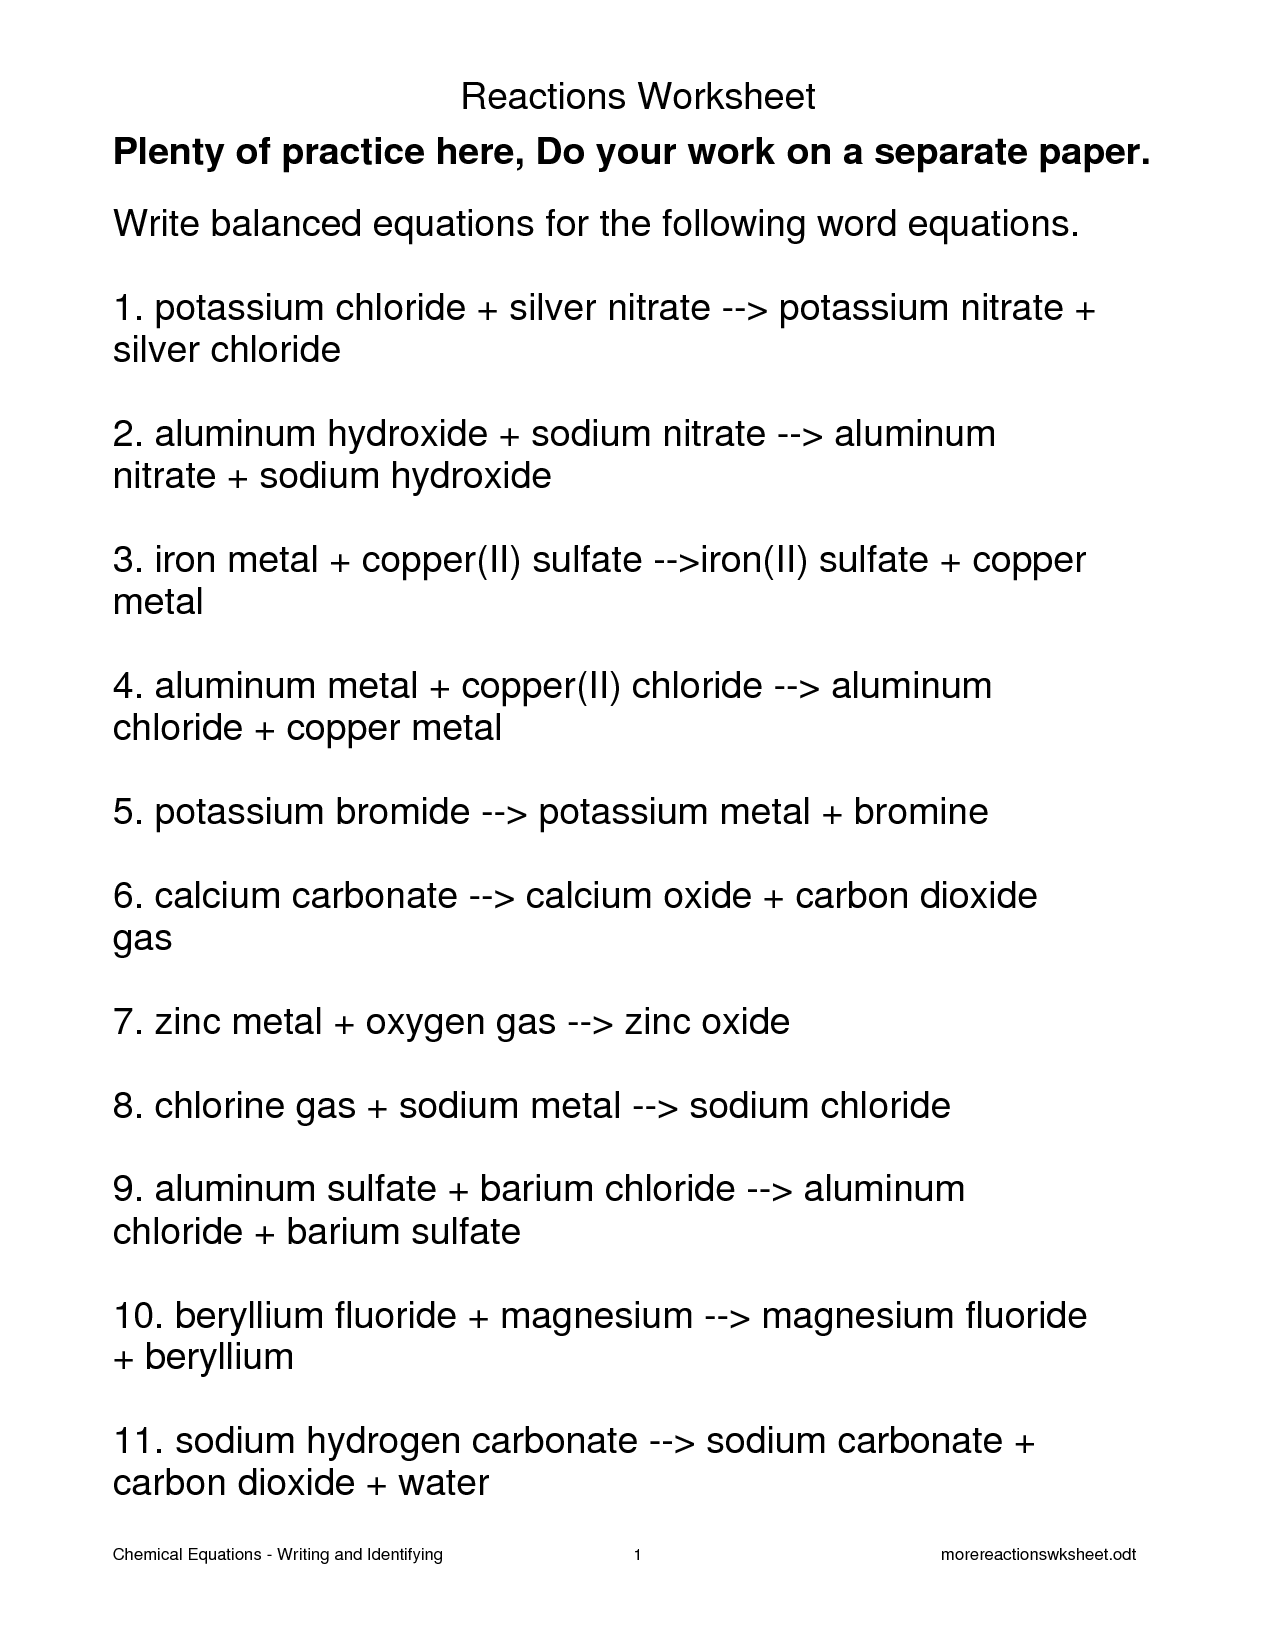 Balanced Equation for Silver Nitrate and Sodium Chloride Image